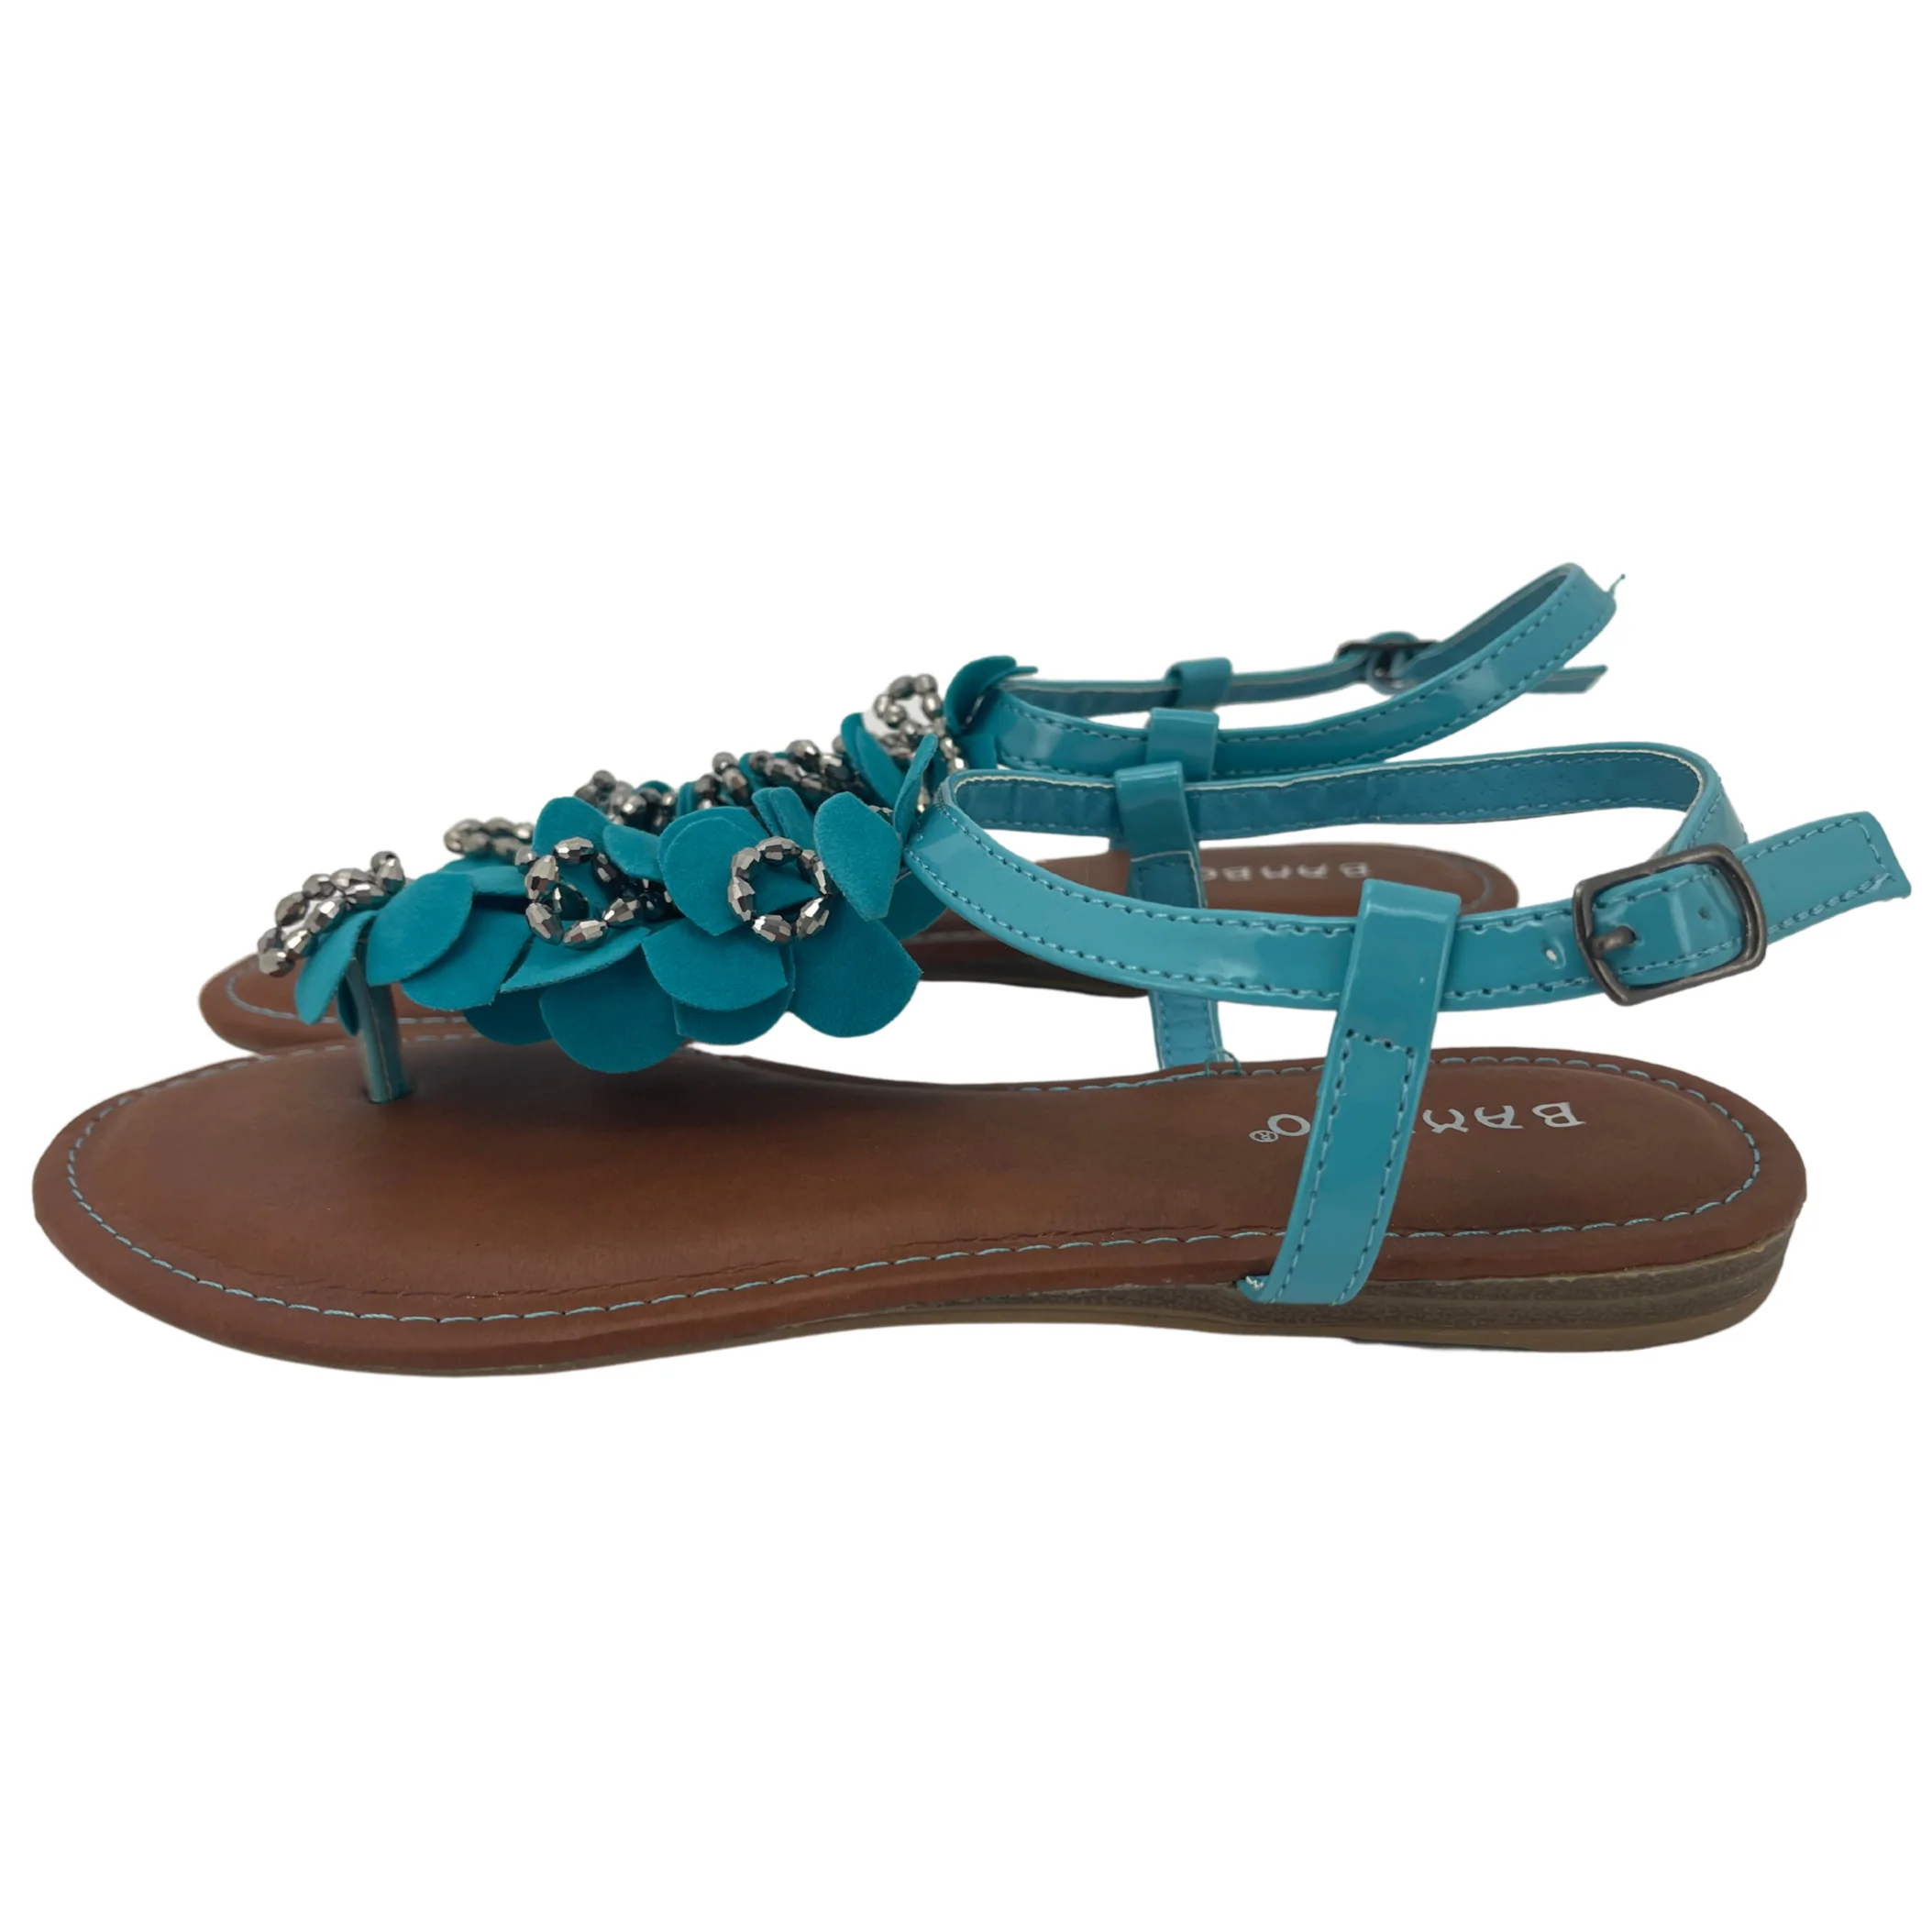 Bamboo Women's Sandals / Ashley / Blue with Beads / Size 6.5